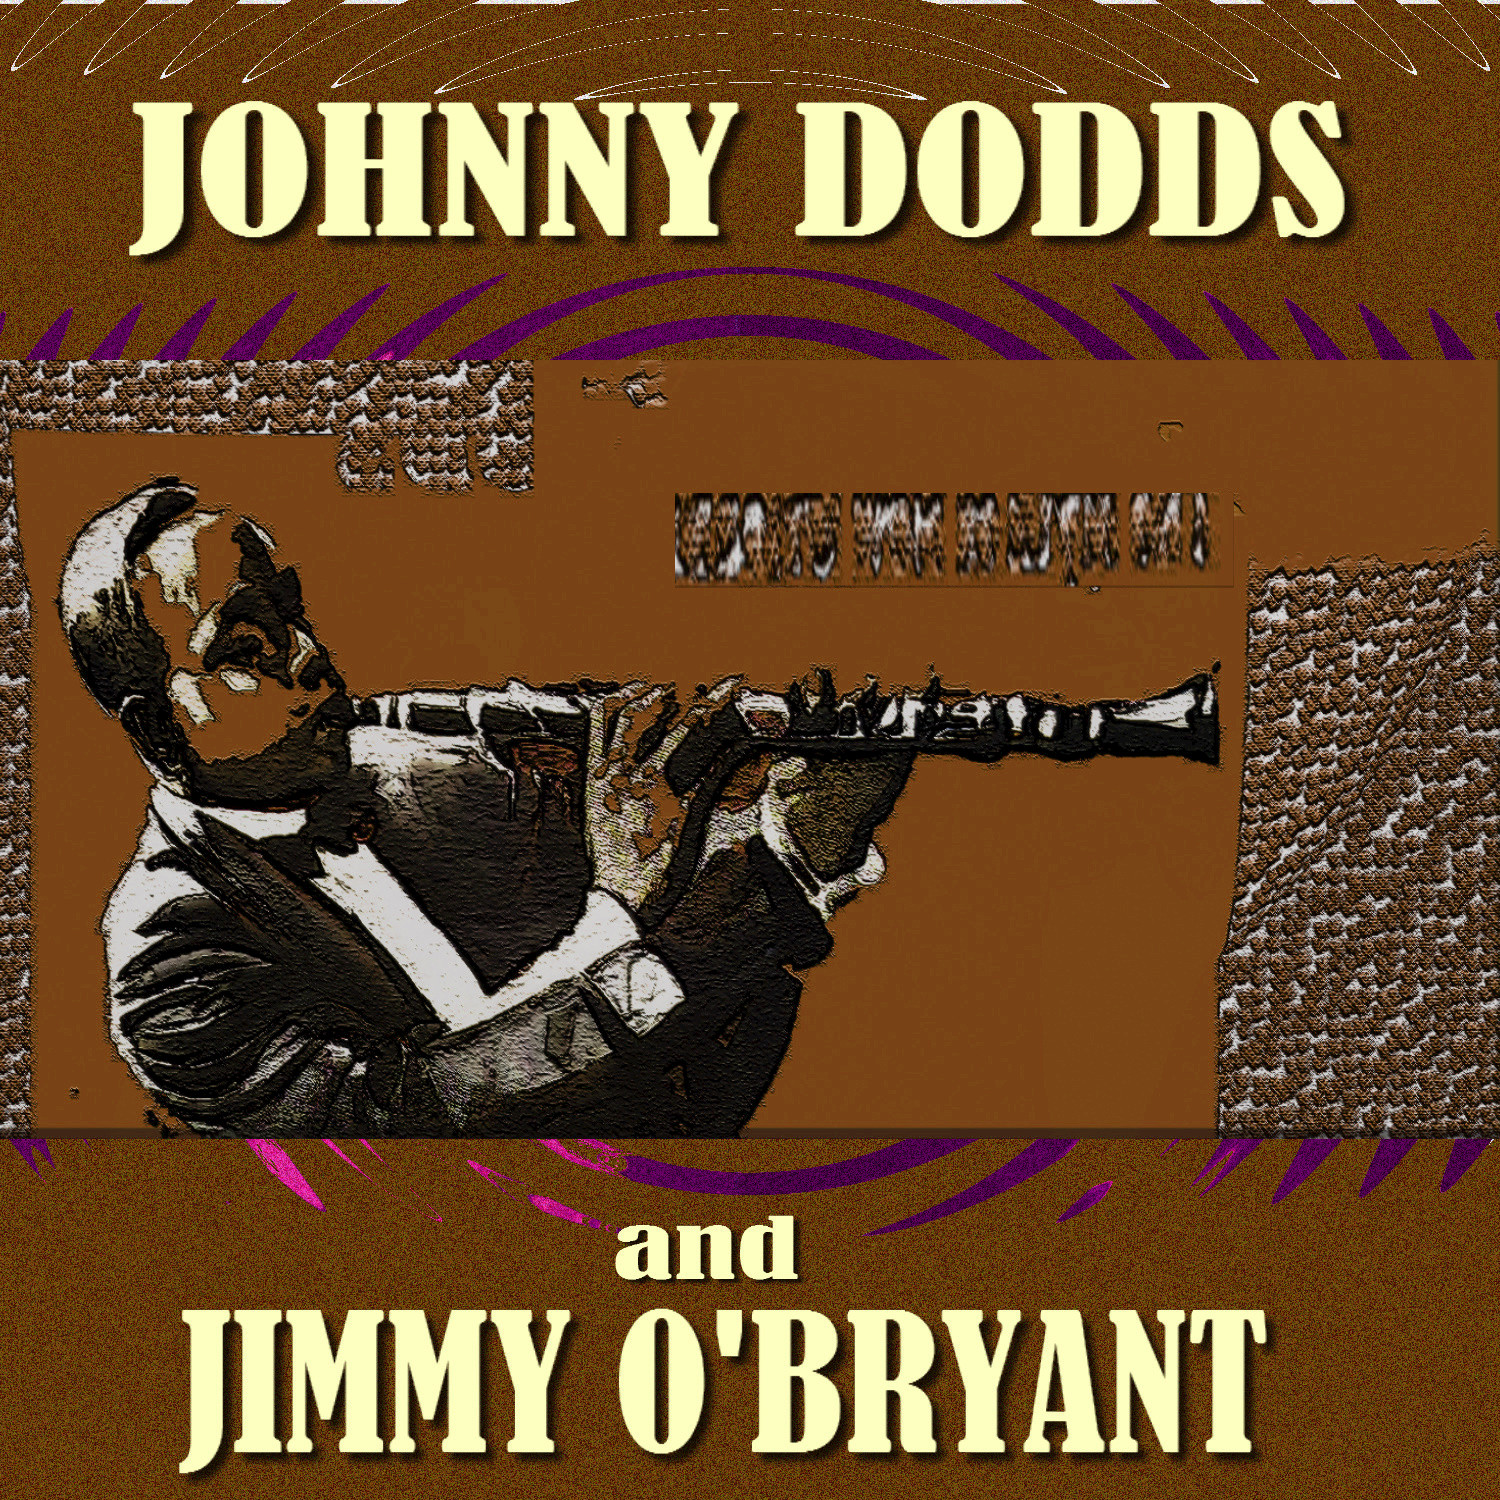 Johnny Dodds and Jimmy O'Bryant